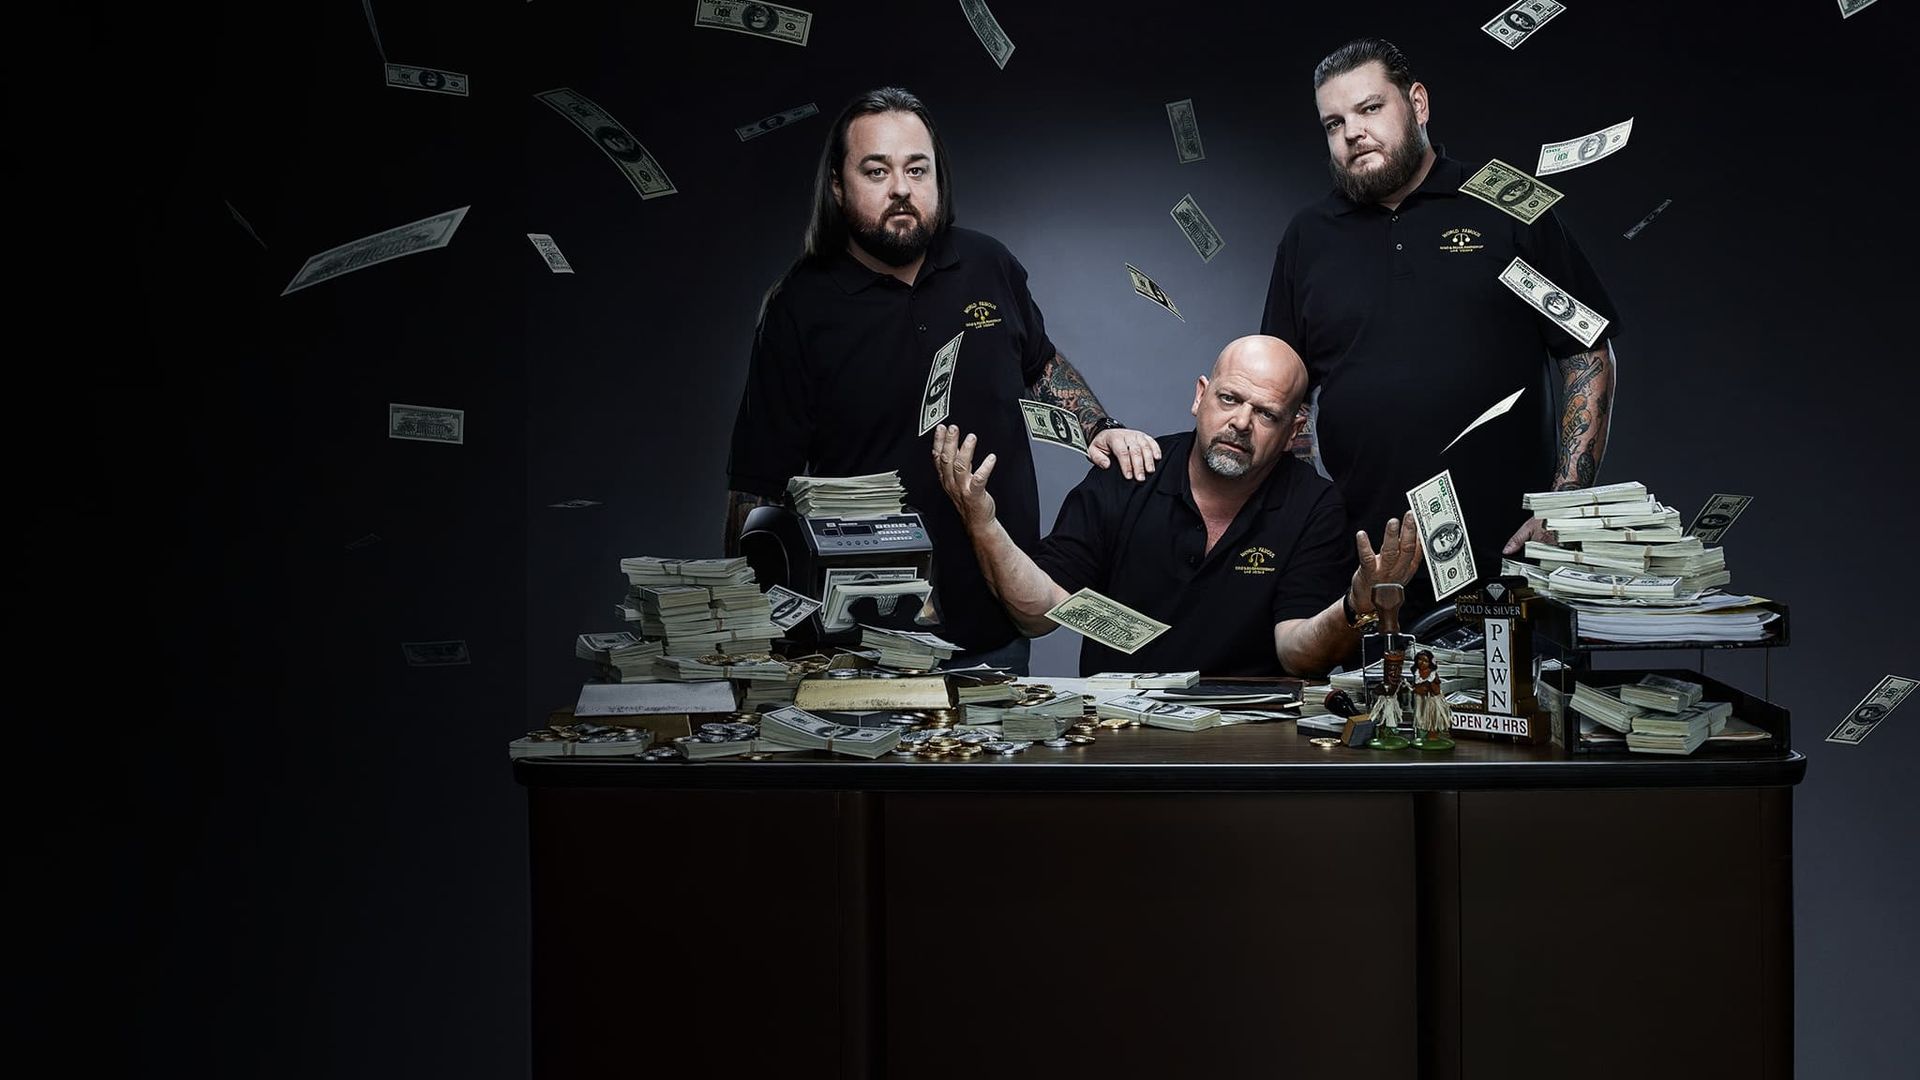 Pawn Stars Shoot During the World Series of Poker